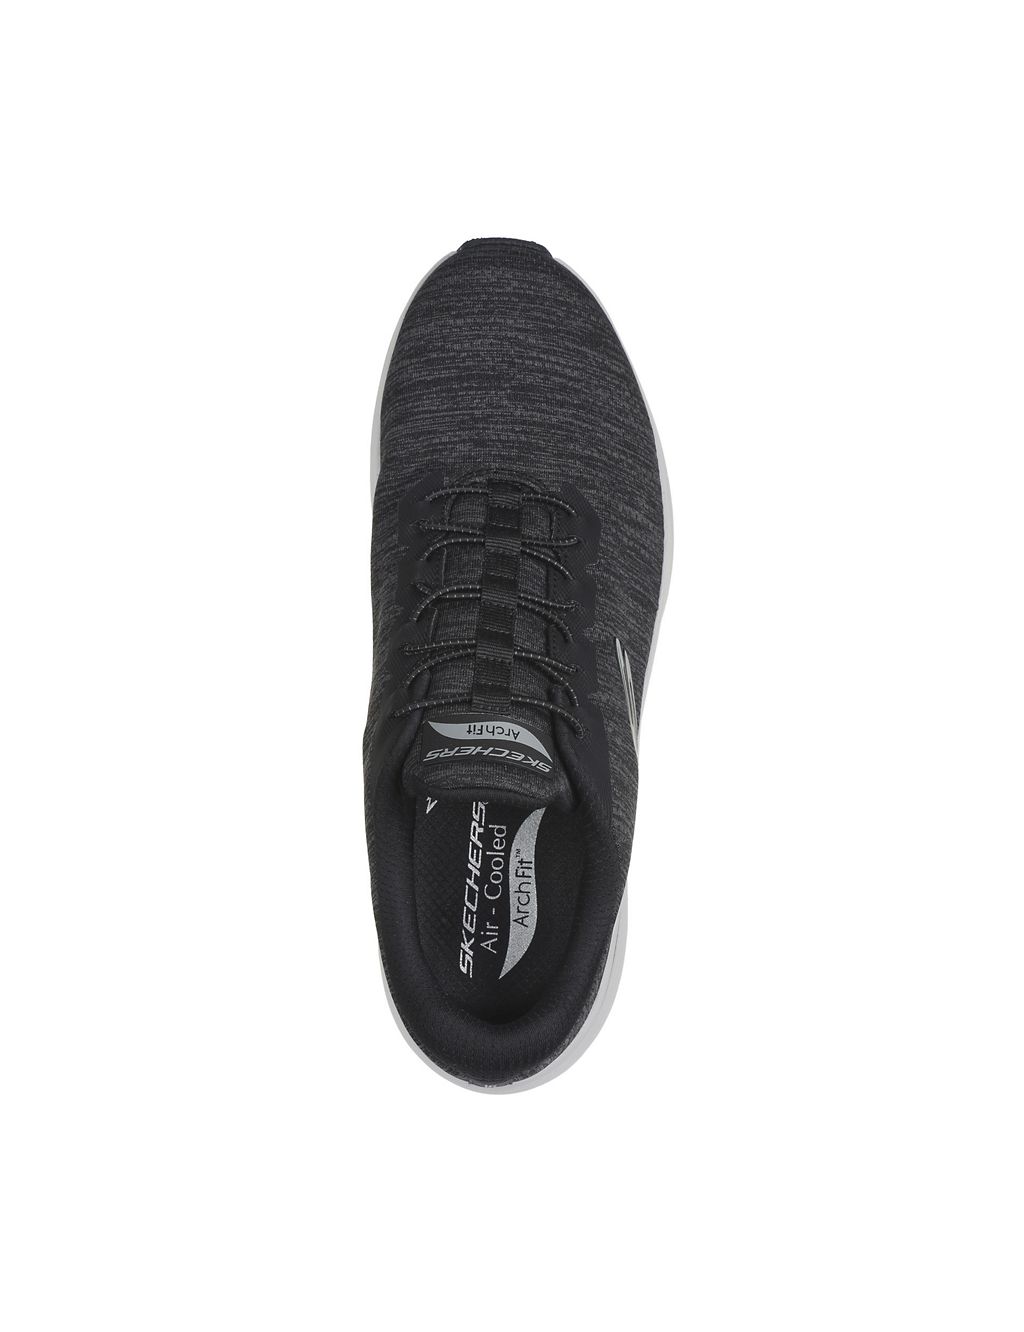 Arch Fit 2.0 Upperhand Slip-On Trainers 2 of 4